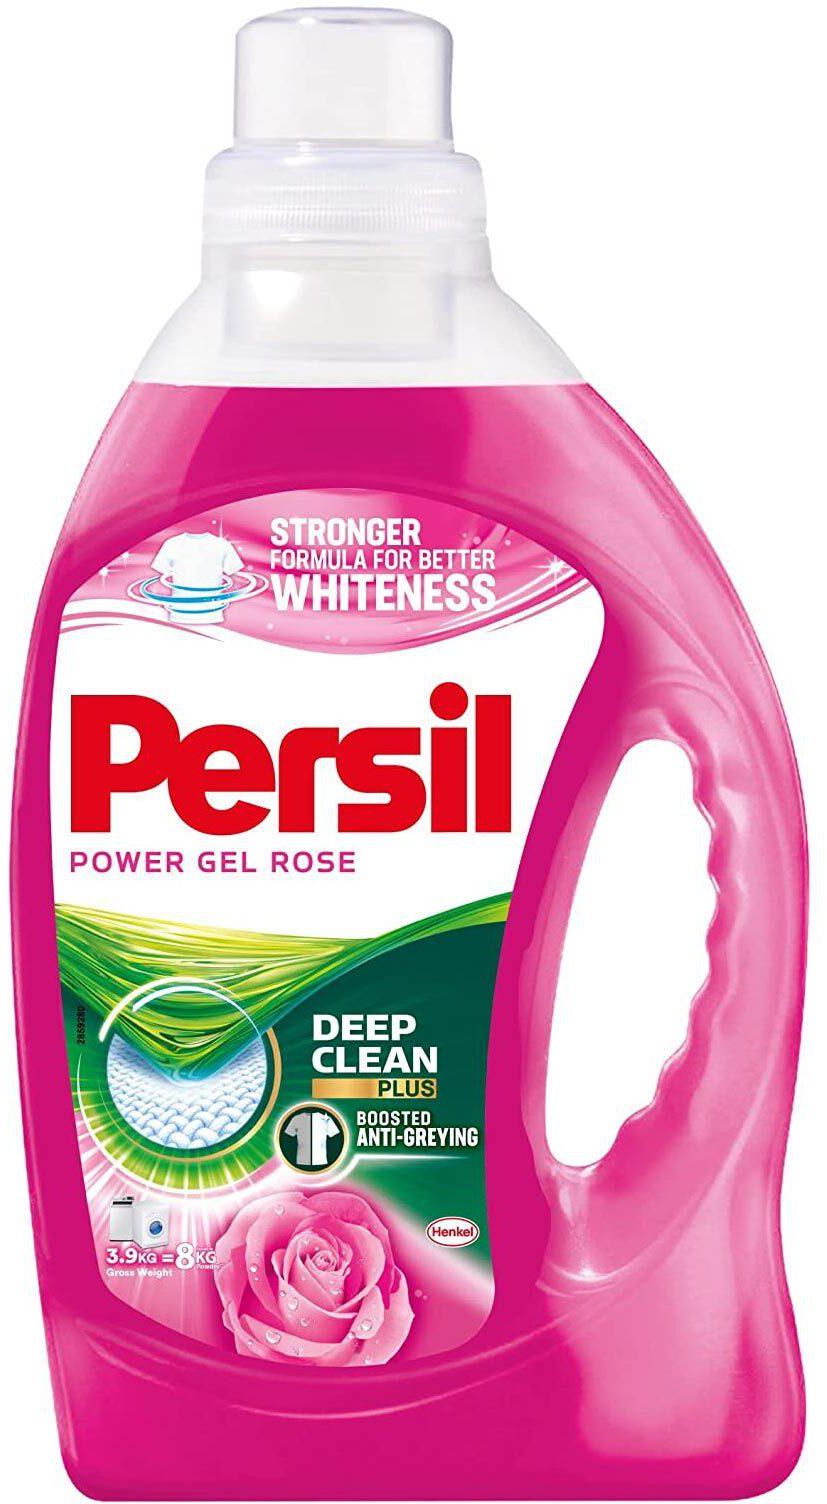 Persil Deep Clean Automatic Laundry Liquid Detergent with Rose Scent - 3.9 Liter